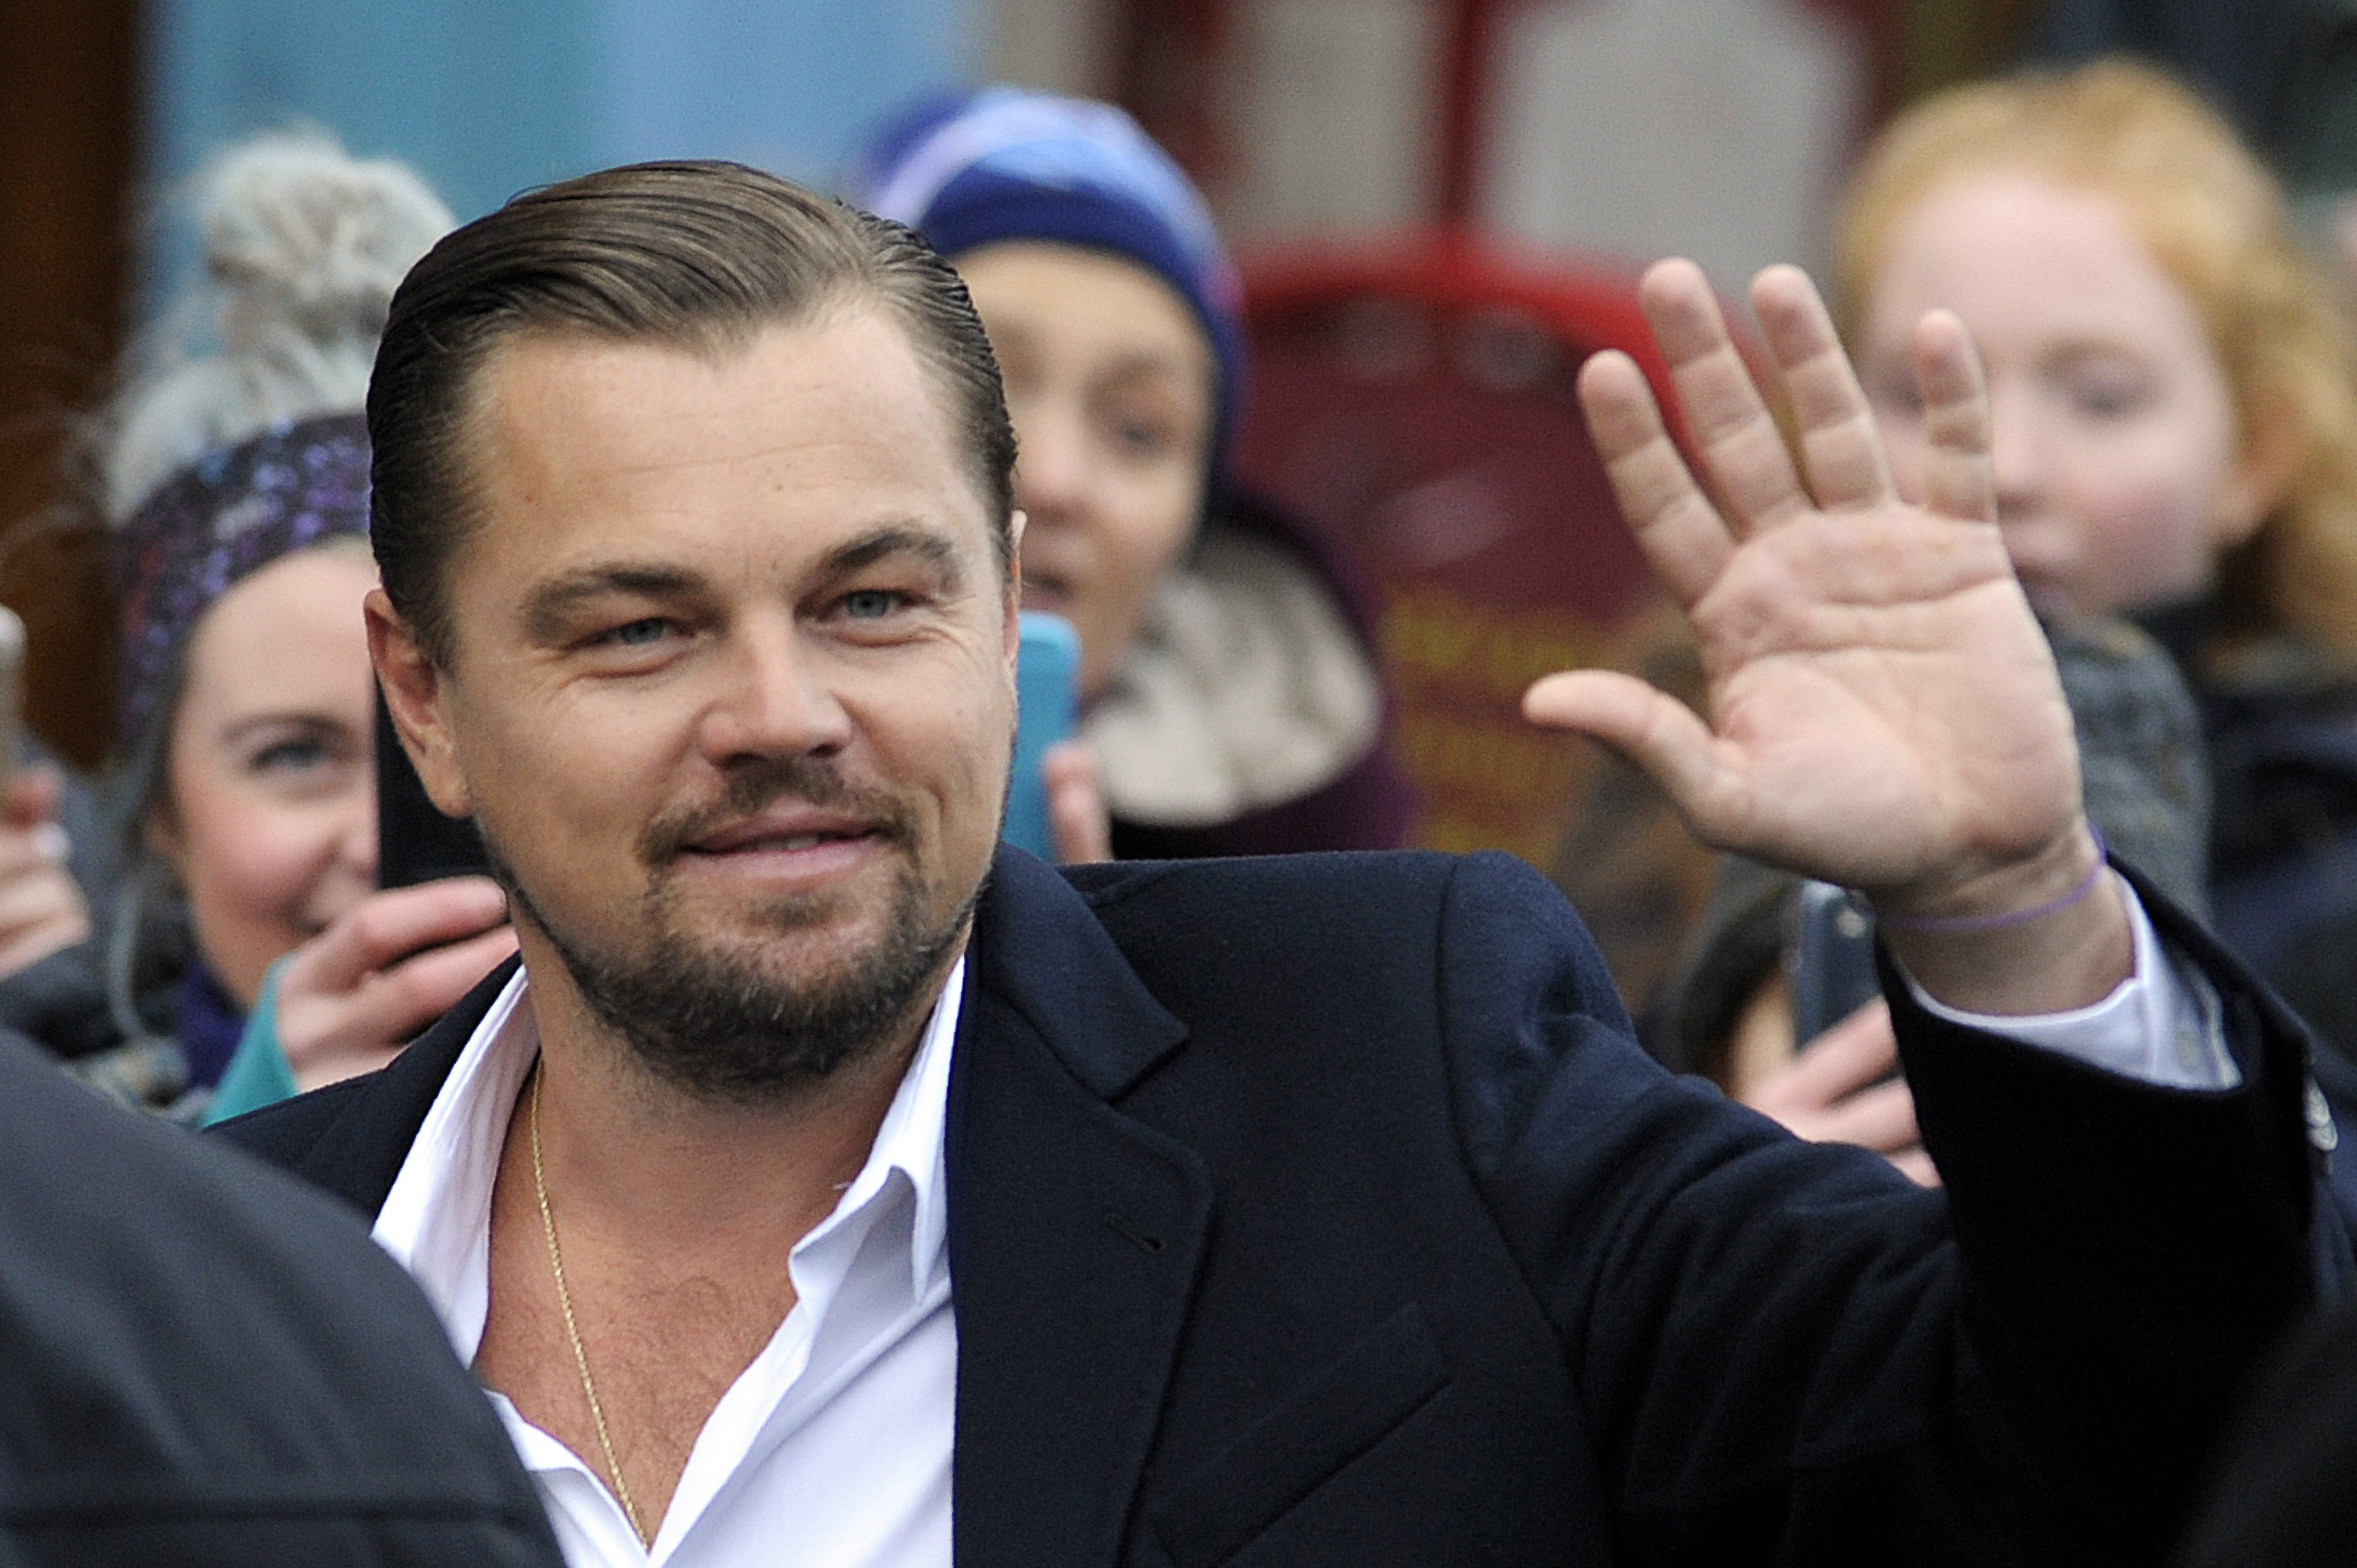 US actor Leonardo Di Caprio arrives at a social restaurant that aims to help the homeless in Edinburgh, Scotland ahead of his appearance this evening at the Scottish Business Awards on November 17, 2016. / AFP PHOTO / Andy Buchanan